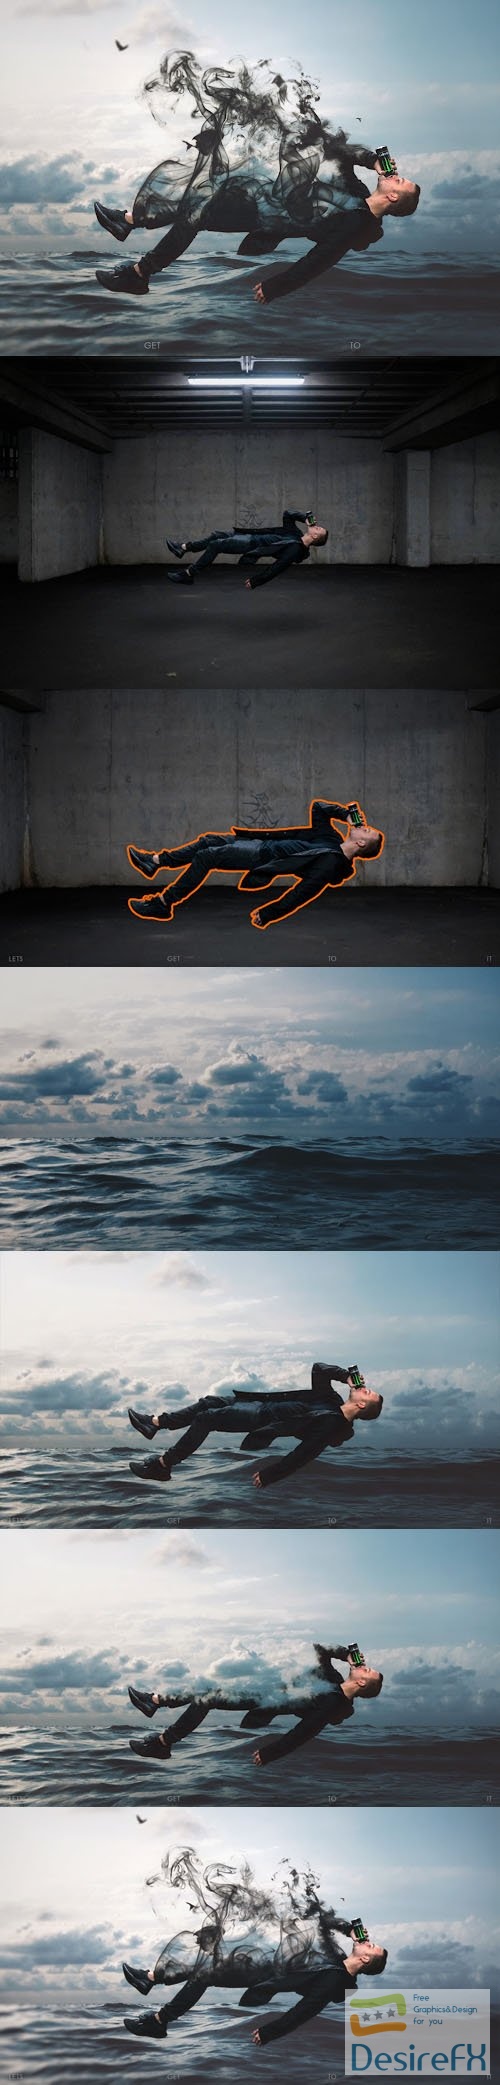 Floating Man With Smoke Over The Sea - Awesome Photoshop Manipulation + Tutorial